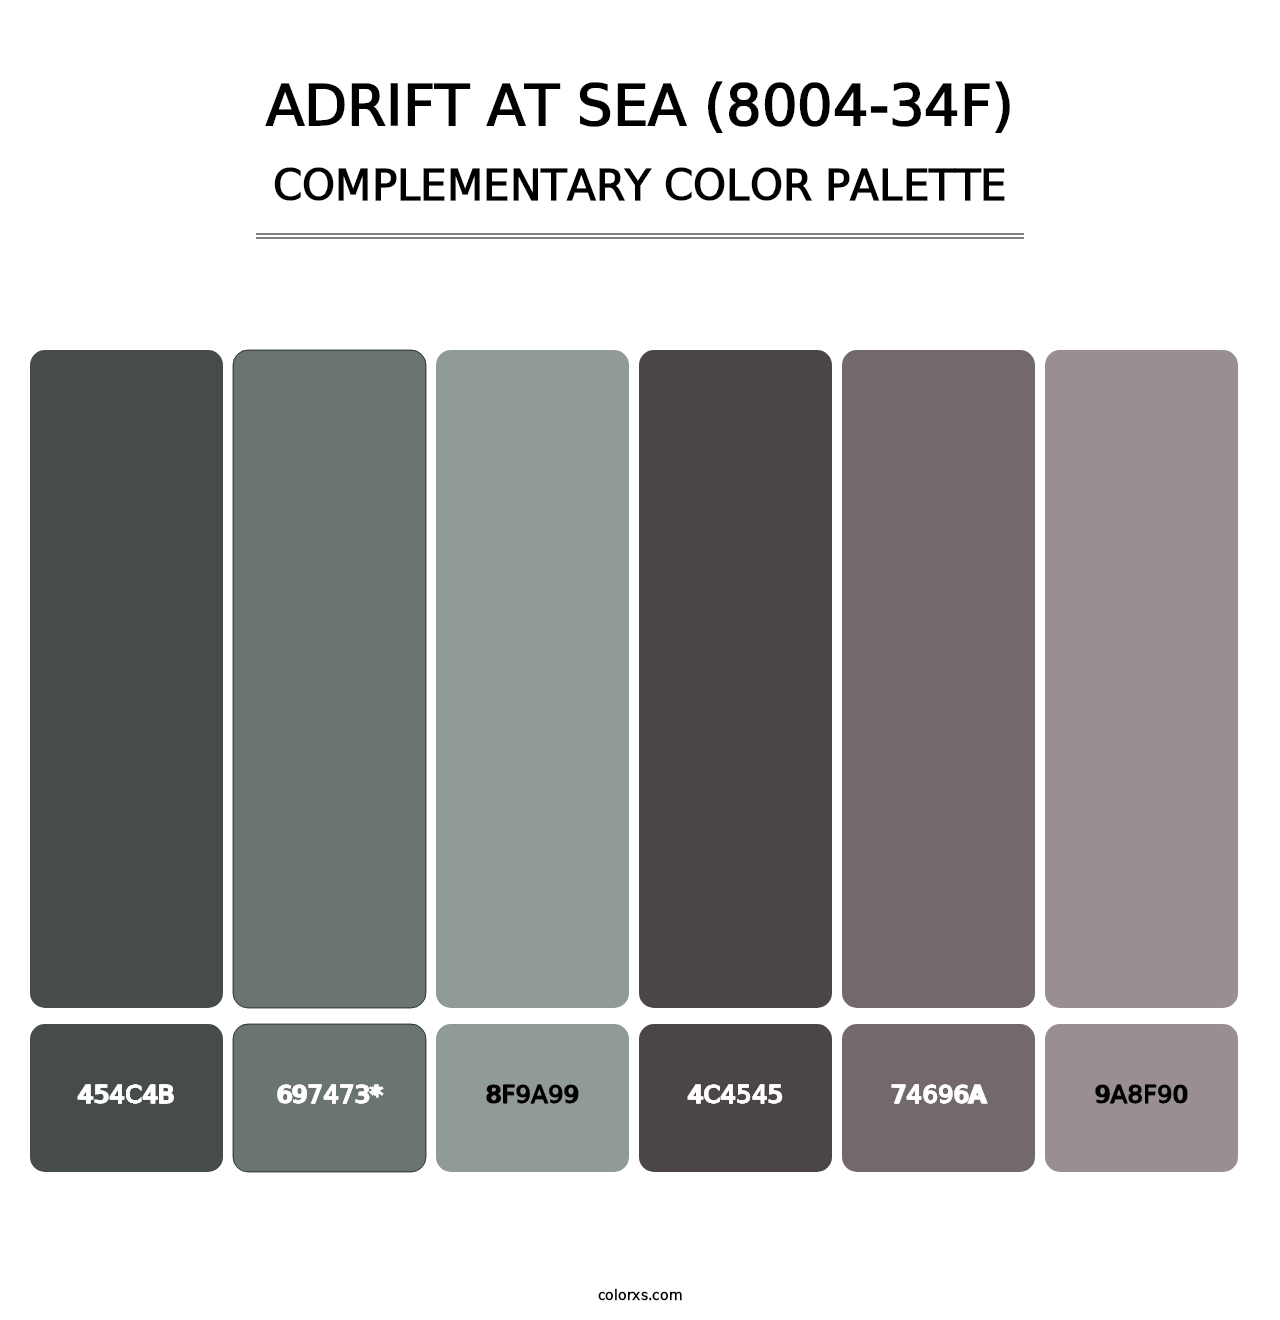 Adrift at Sea (8004-34F) - Complementary Color Palette